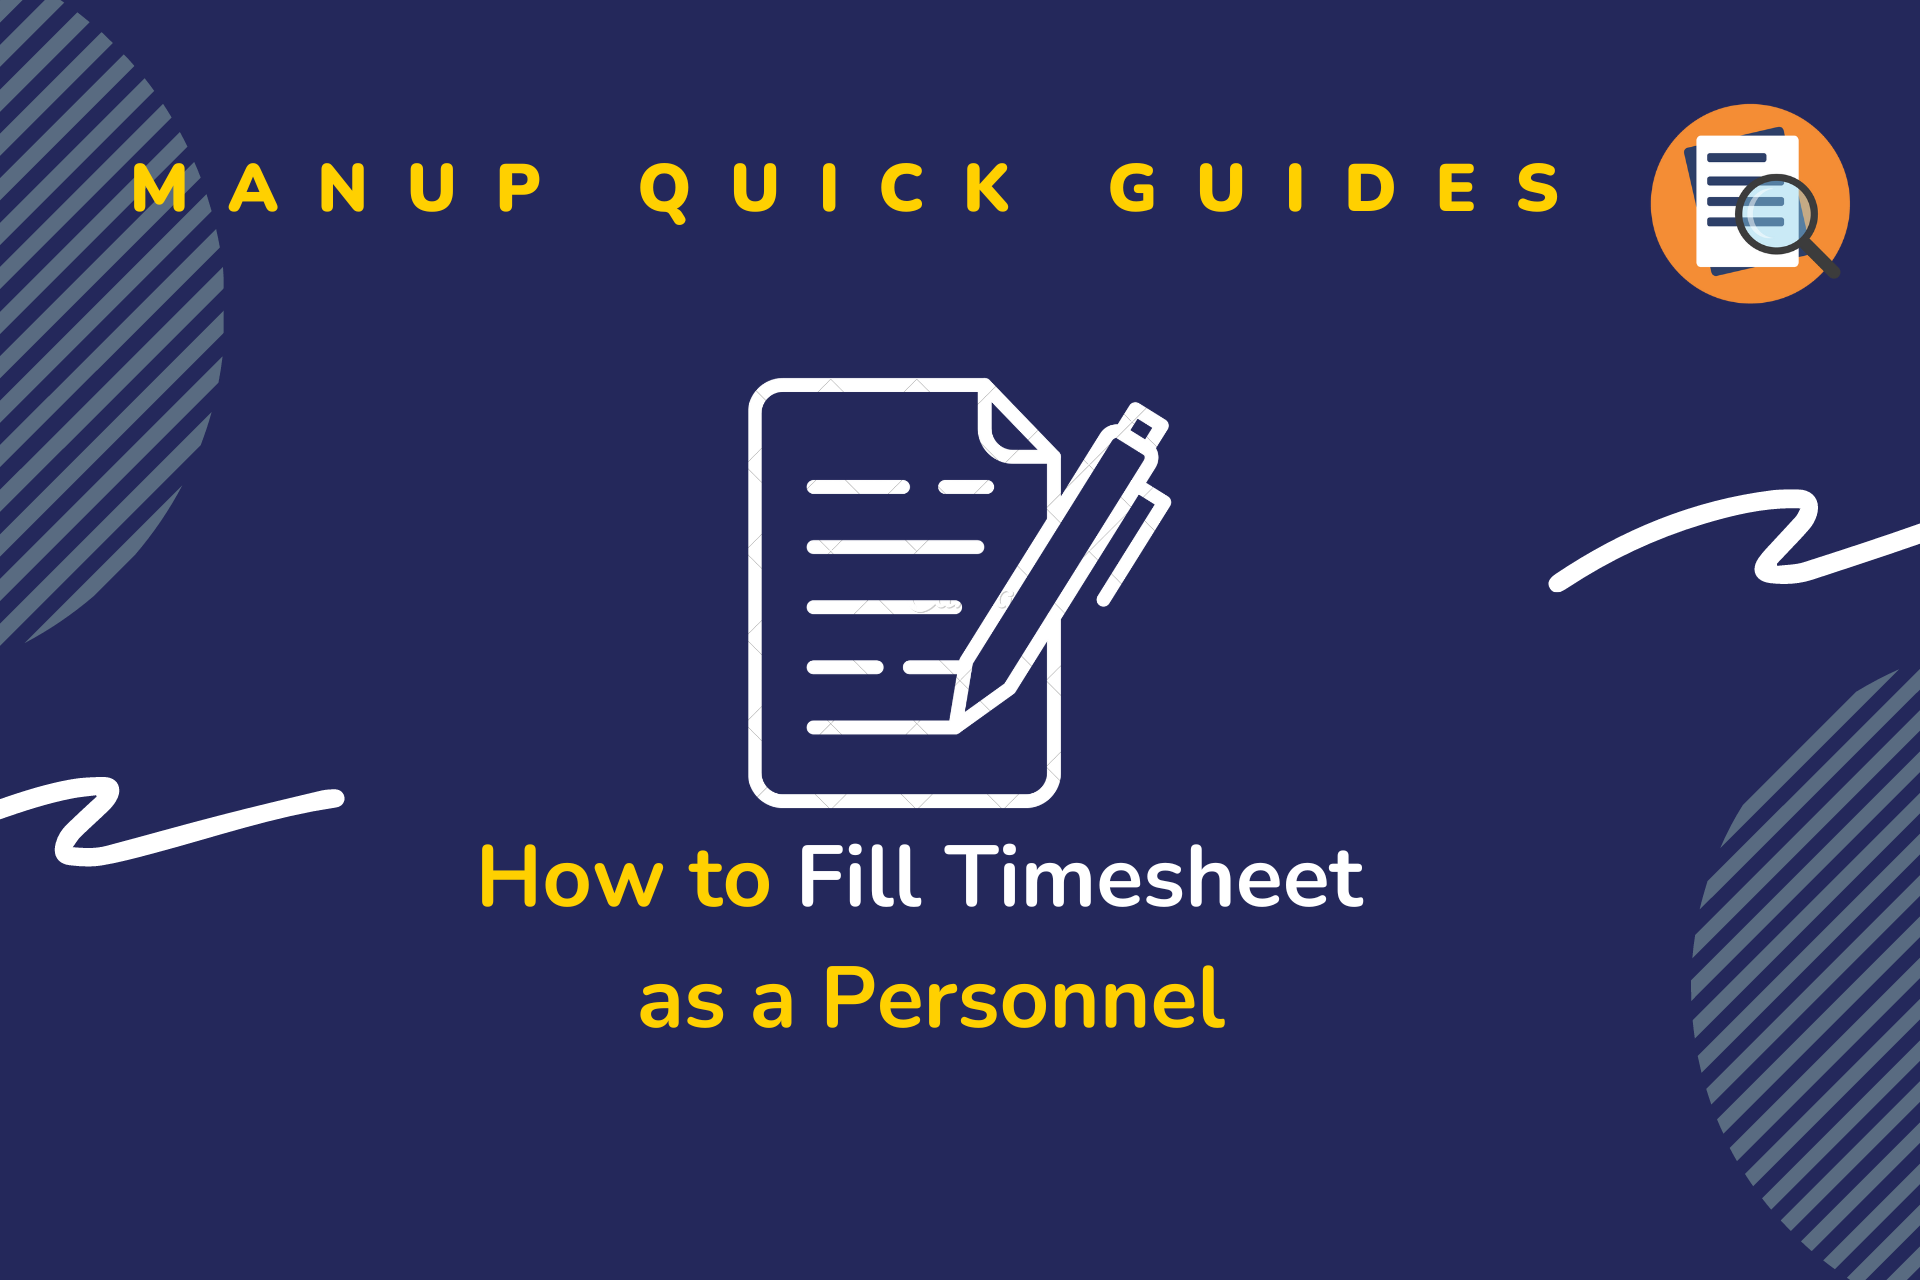 0697847a596295ff9de2dc52ae8015ad8353.How to guide fill timesheet as a personnel.png